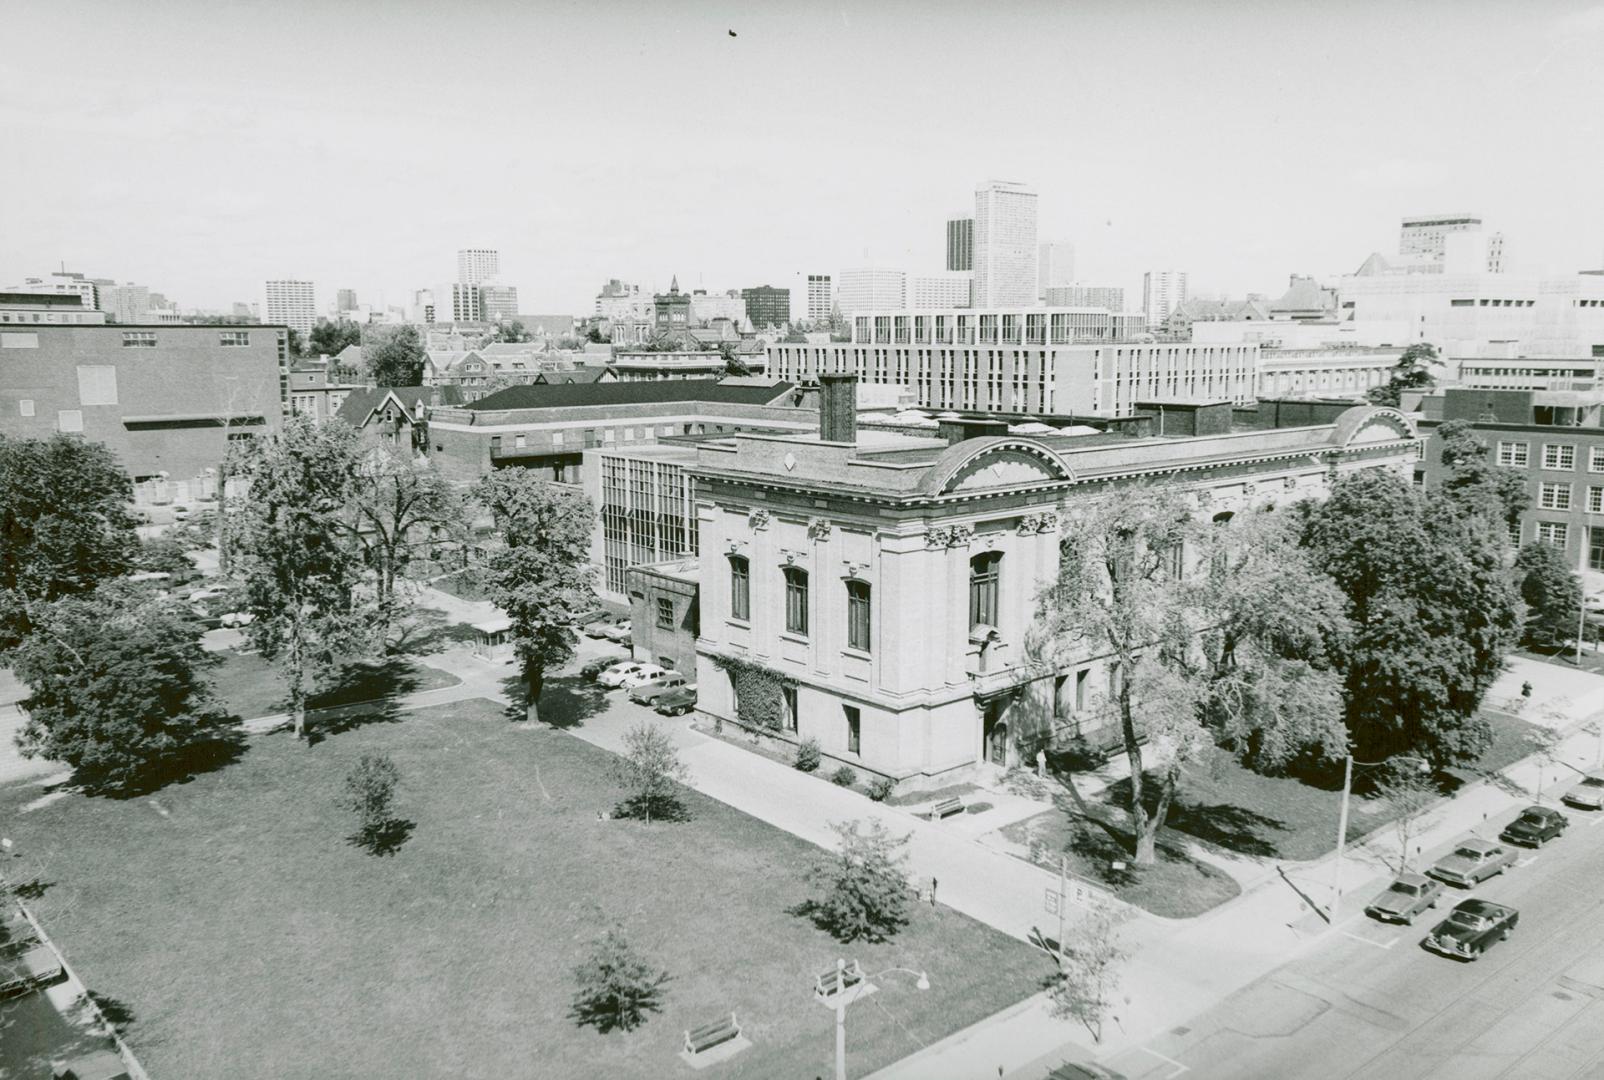 High view of library building, lawn, street and other buildings/